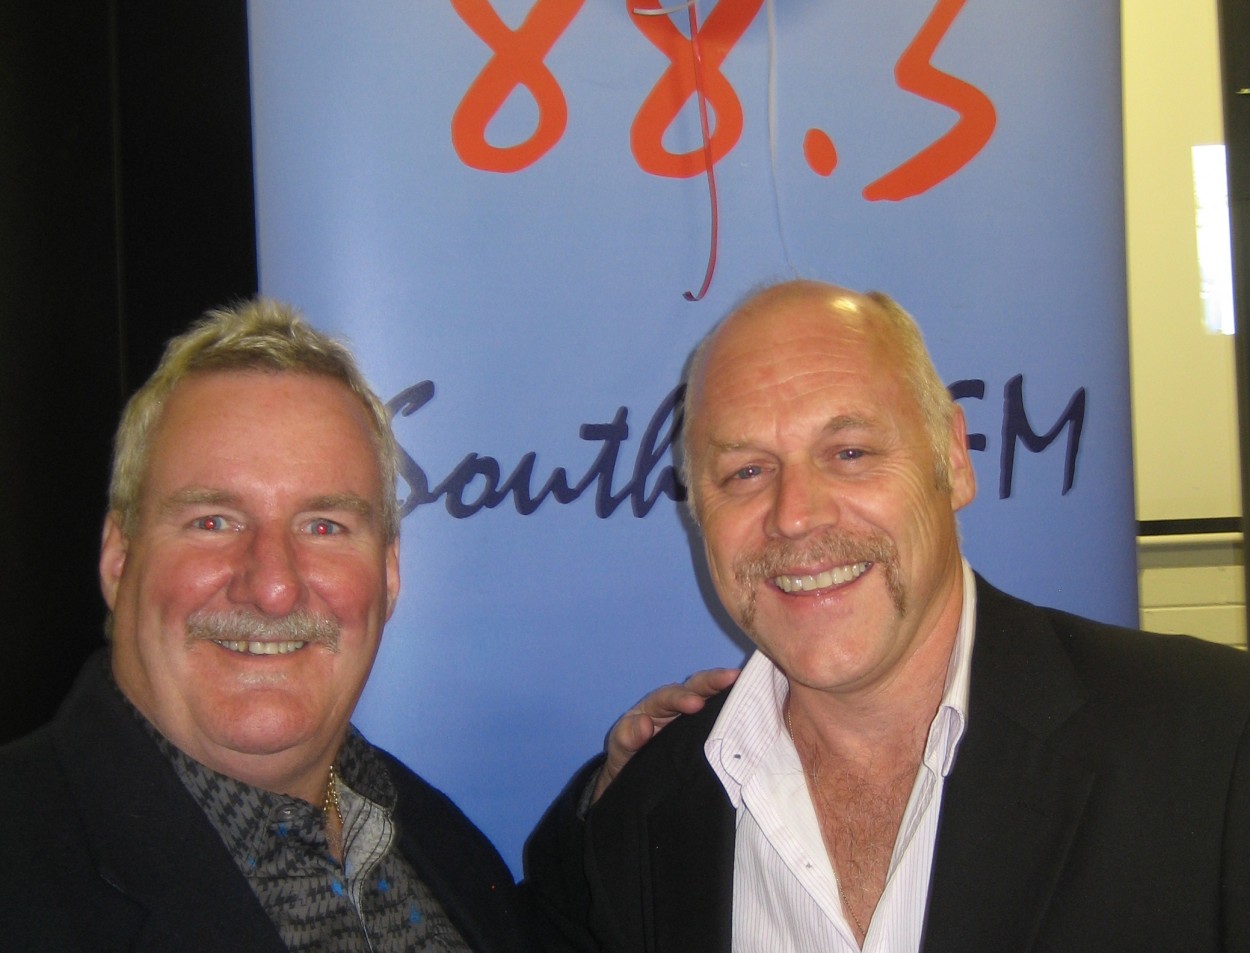 88.3 Southern FM celebrates 25 years of VAFA Sundays with anniversary show this weekend